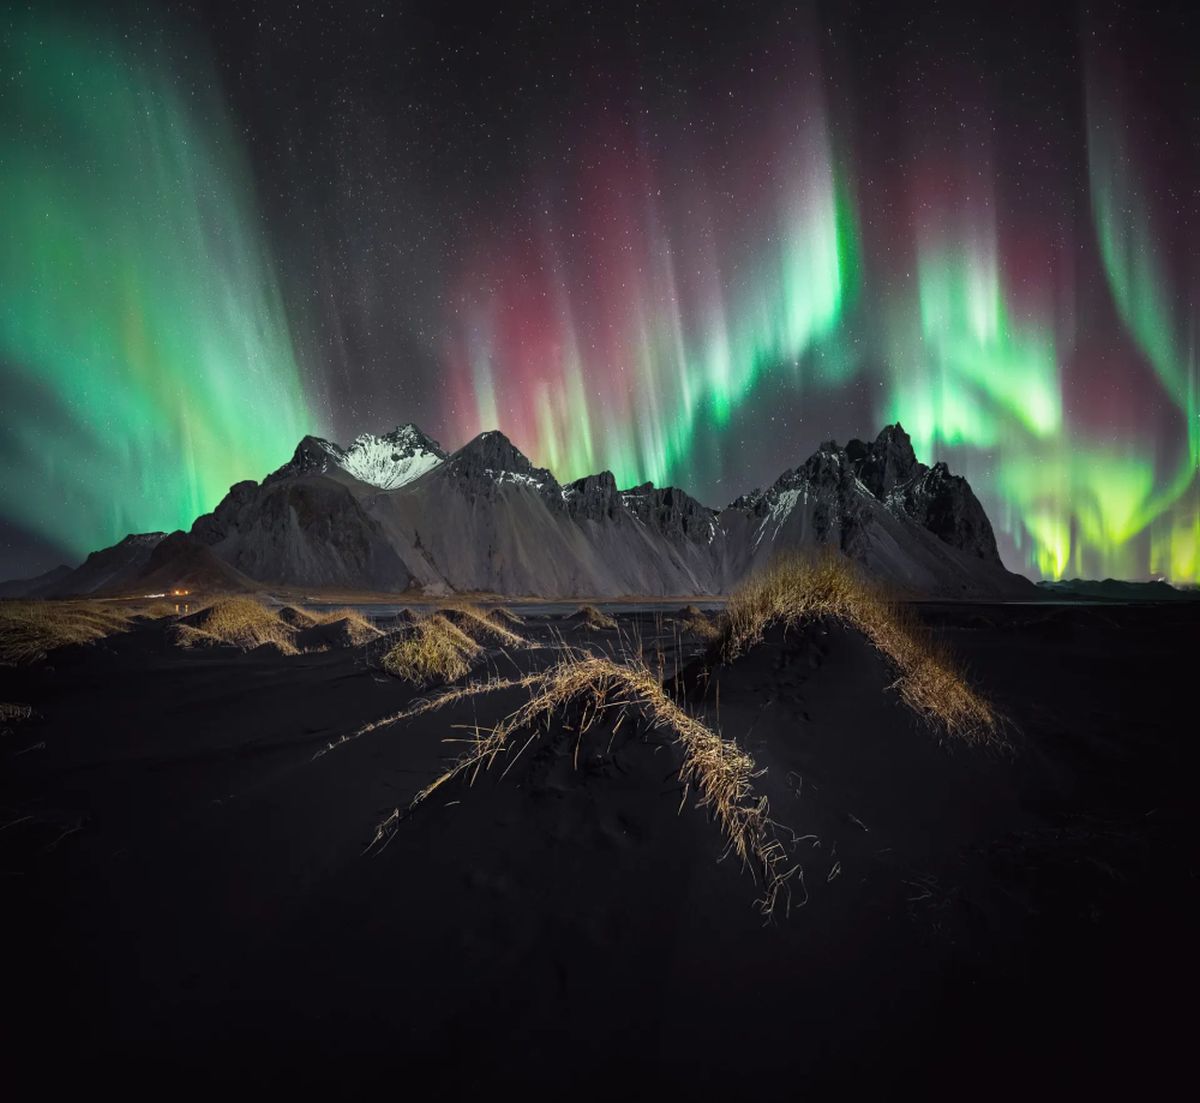 Northern lights photographer of the year